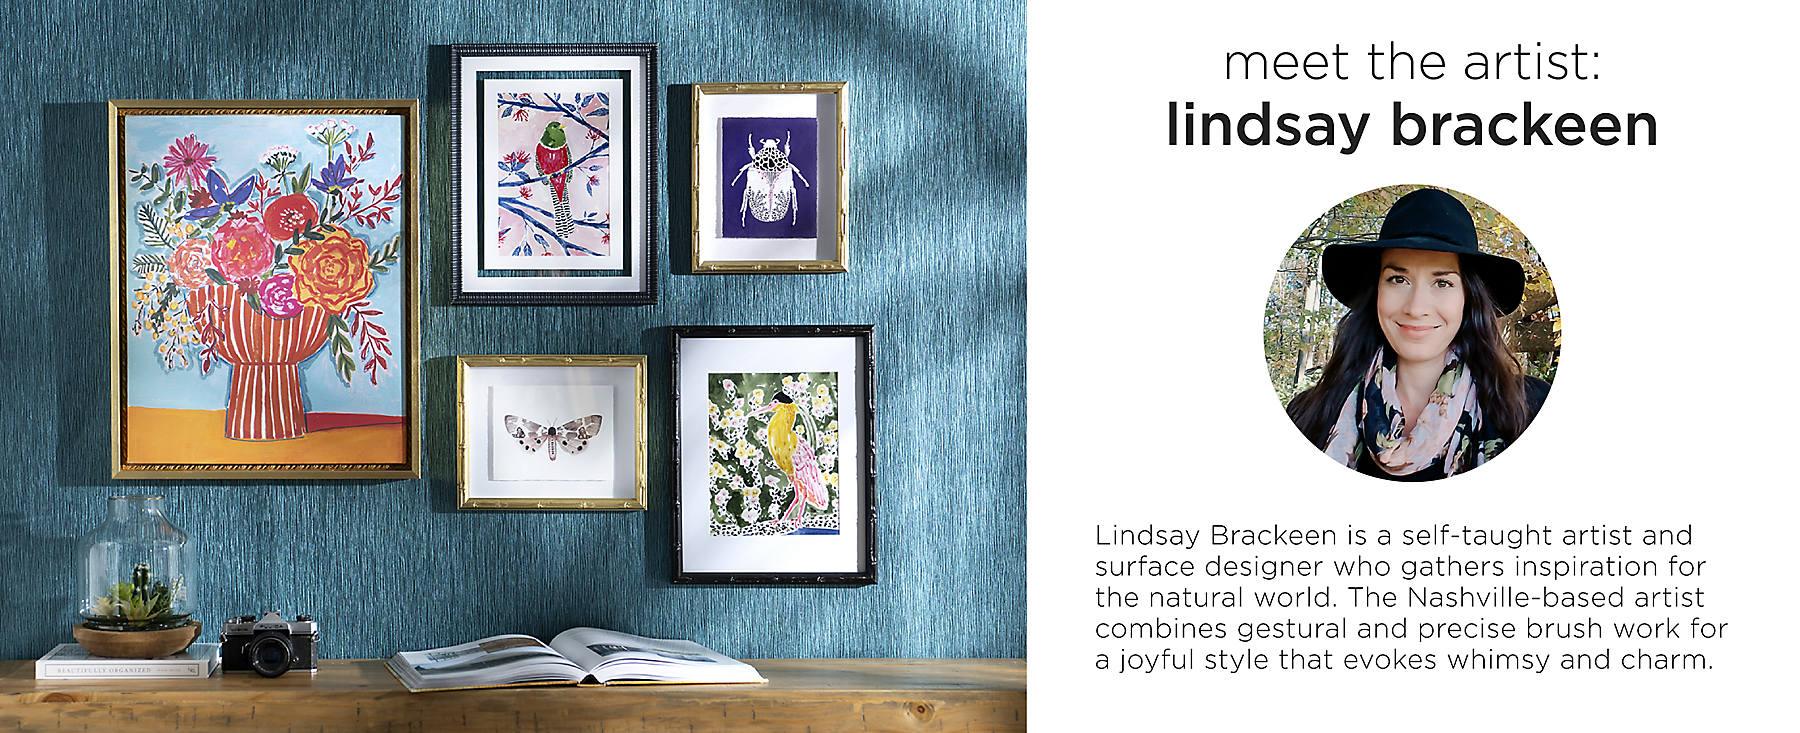 Meet the artist: Lindsay Brackeen is a self-taught artist and surface designer who gathers inspiration for the natural world. The Nashville-based artist combines gestural and precise brush work for a joyful style that evokes whimsy and charm.